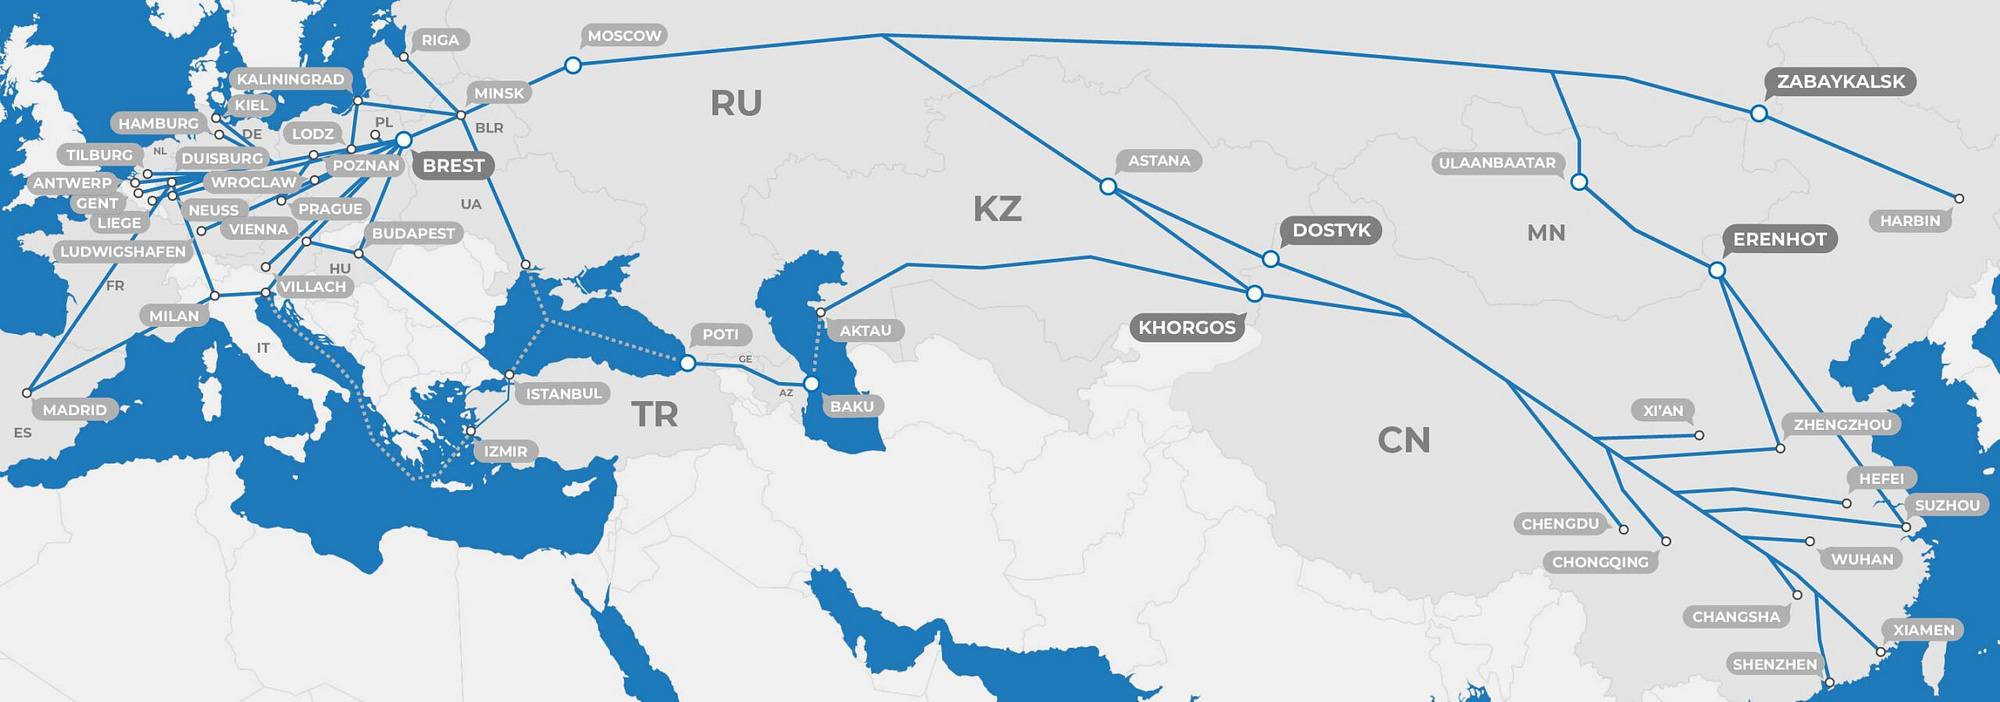 Map of Eurasia showing train routes between Europe and China